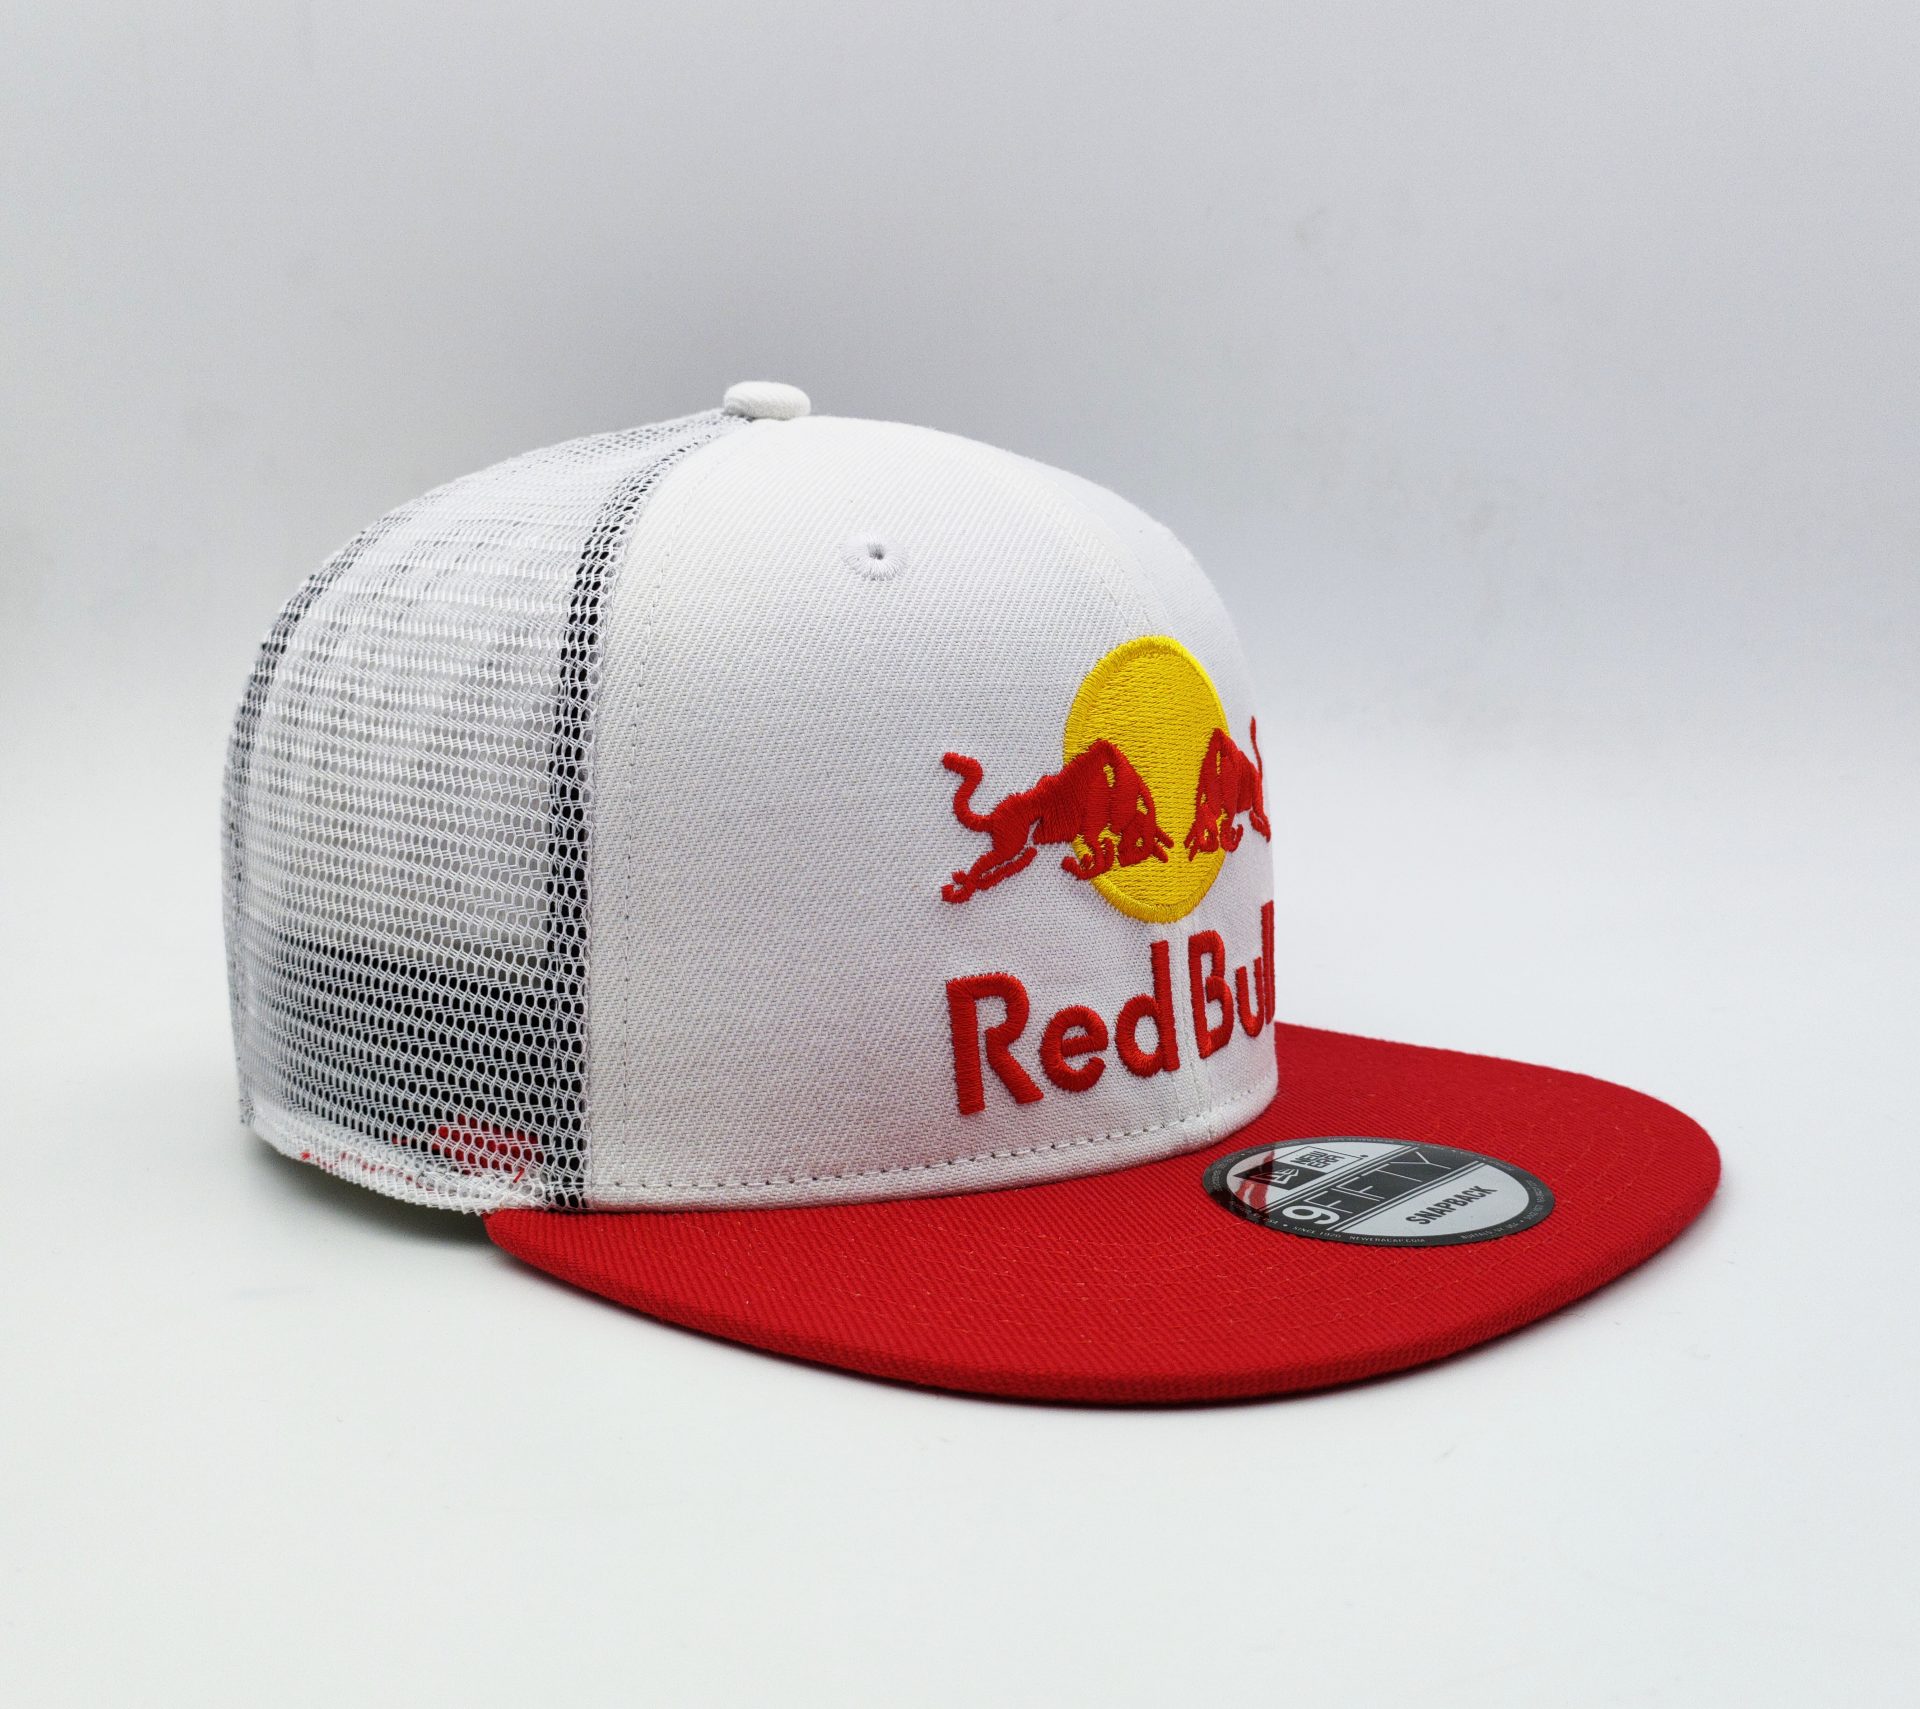 white red bull cap with red flat brim